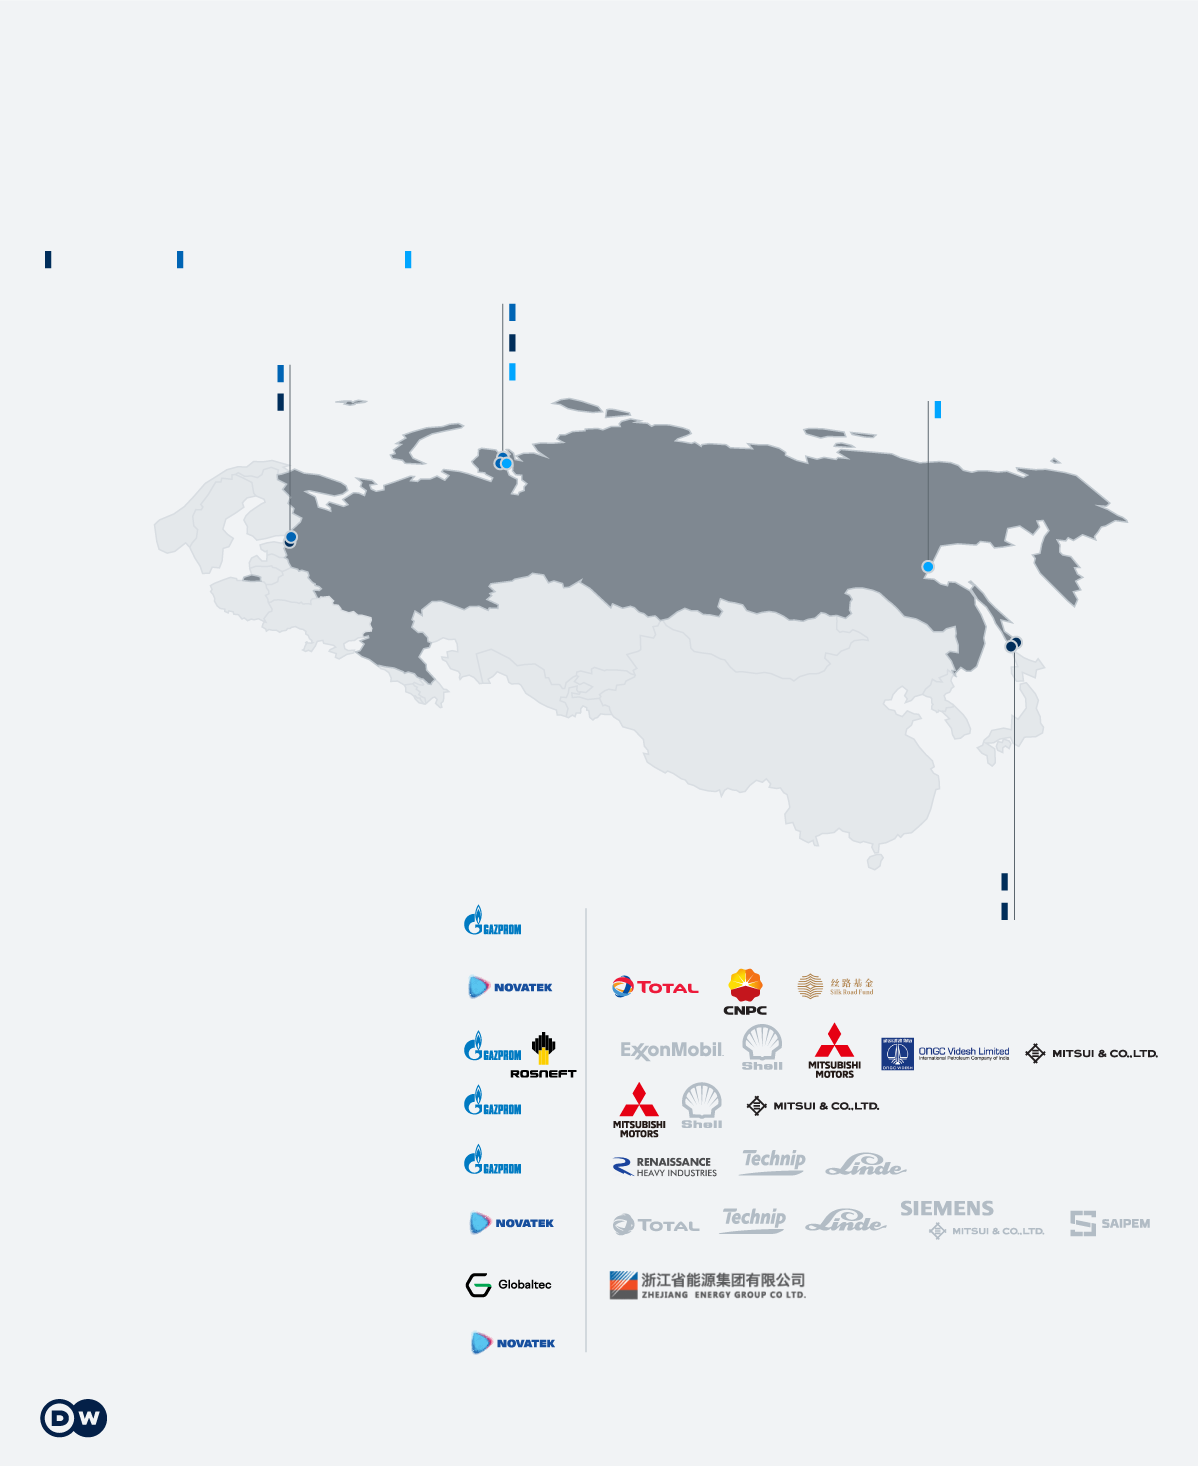 “The LNG plants of the Russian Federation and the Western companies that were part of the consortia and terminated their cooperation after the Russian invasion are presented. ”